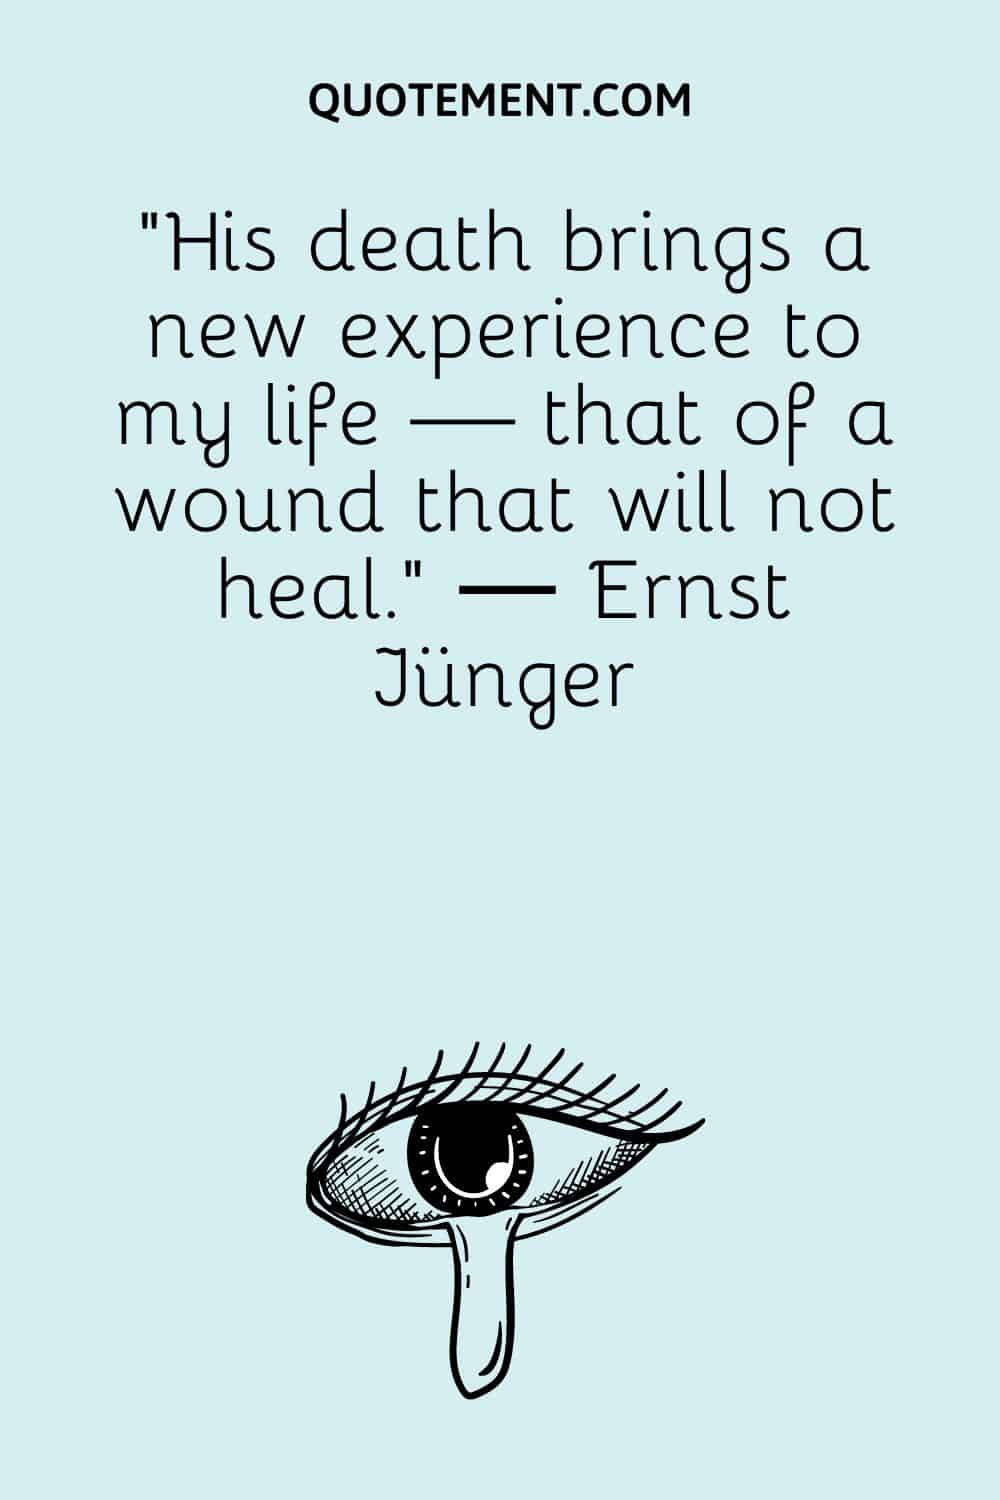 “His death brings a new experience to my life — that of a wound that will not heal.” ― Ernst Jünger